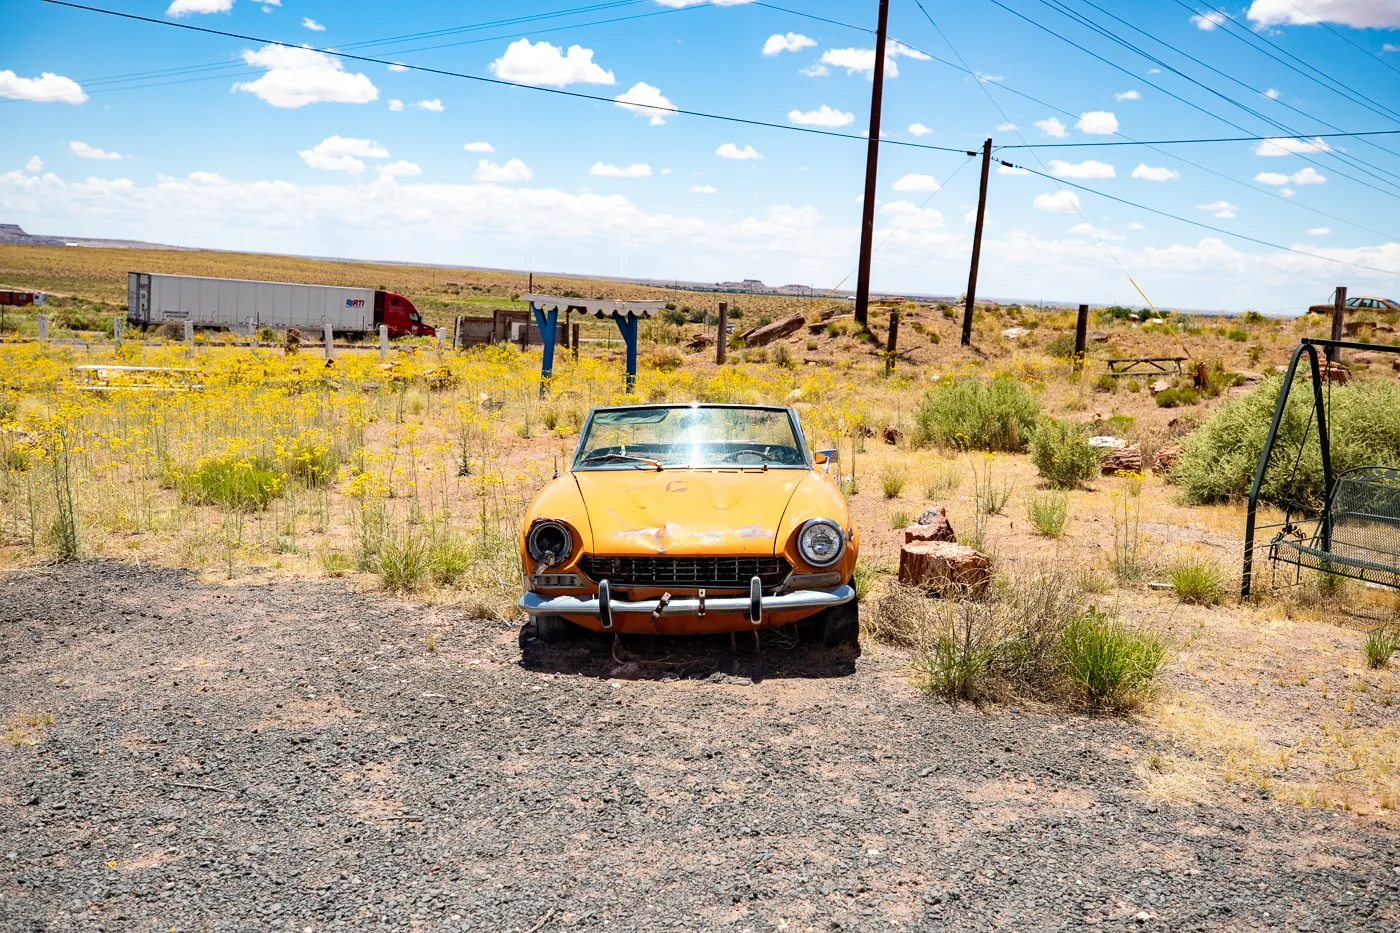 Vintage Car at Stewart's Petrified Wood in Holbrook, Arizona Route 66 Roadside Attraction